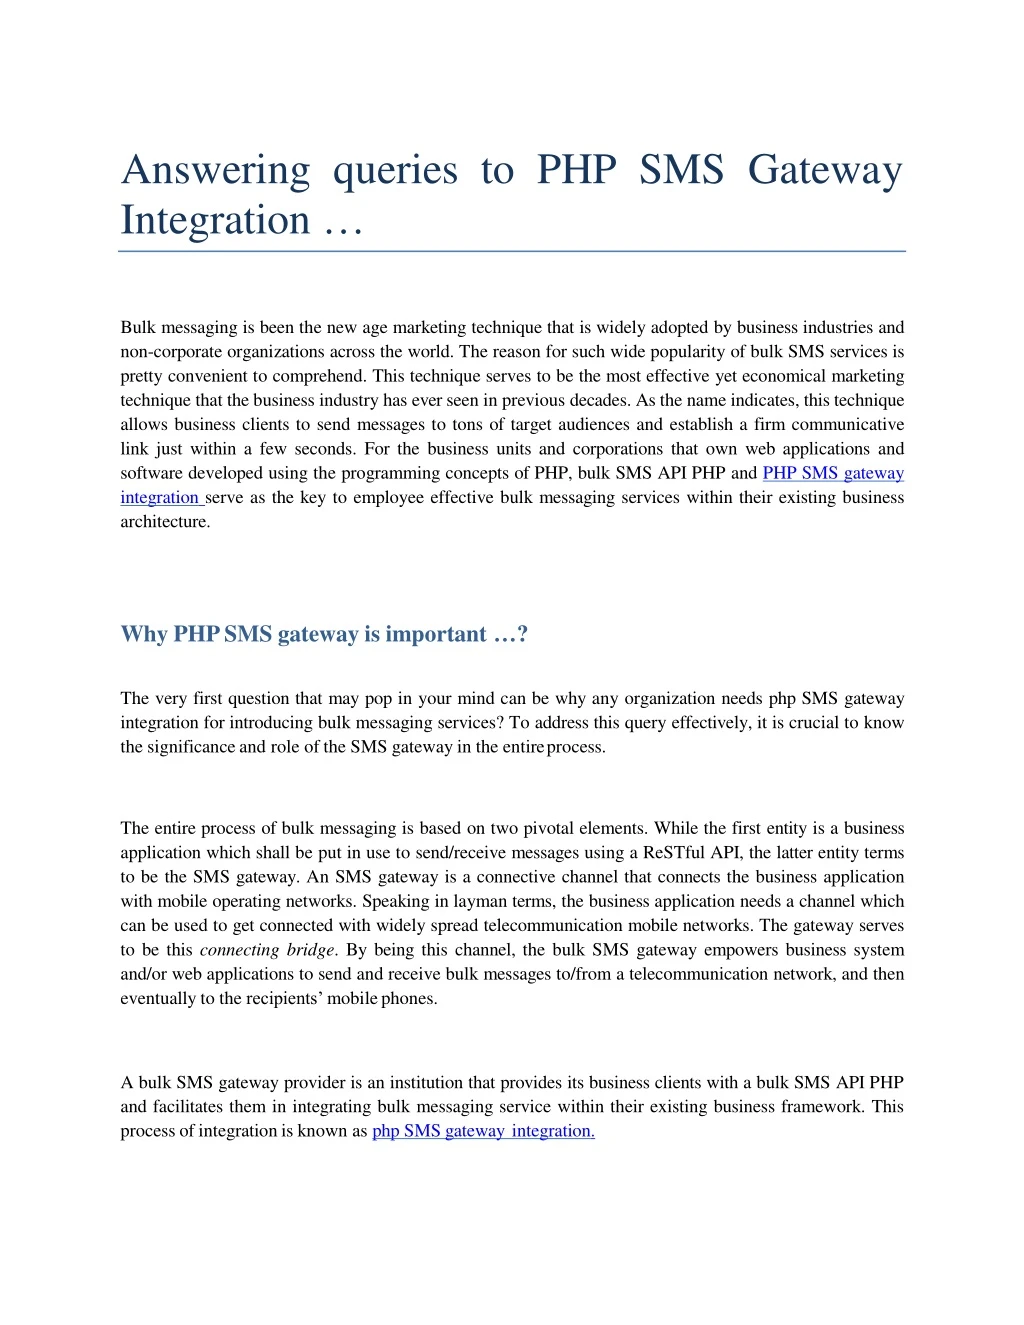 answering queries to php sms gatew a y integration